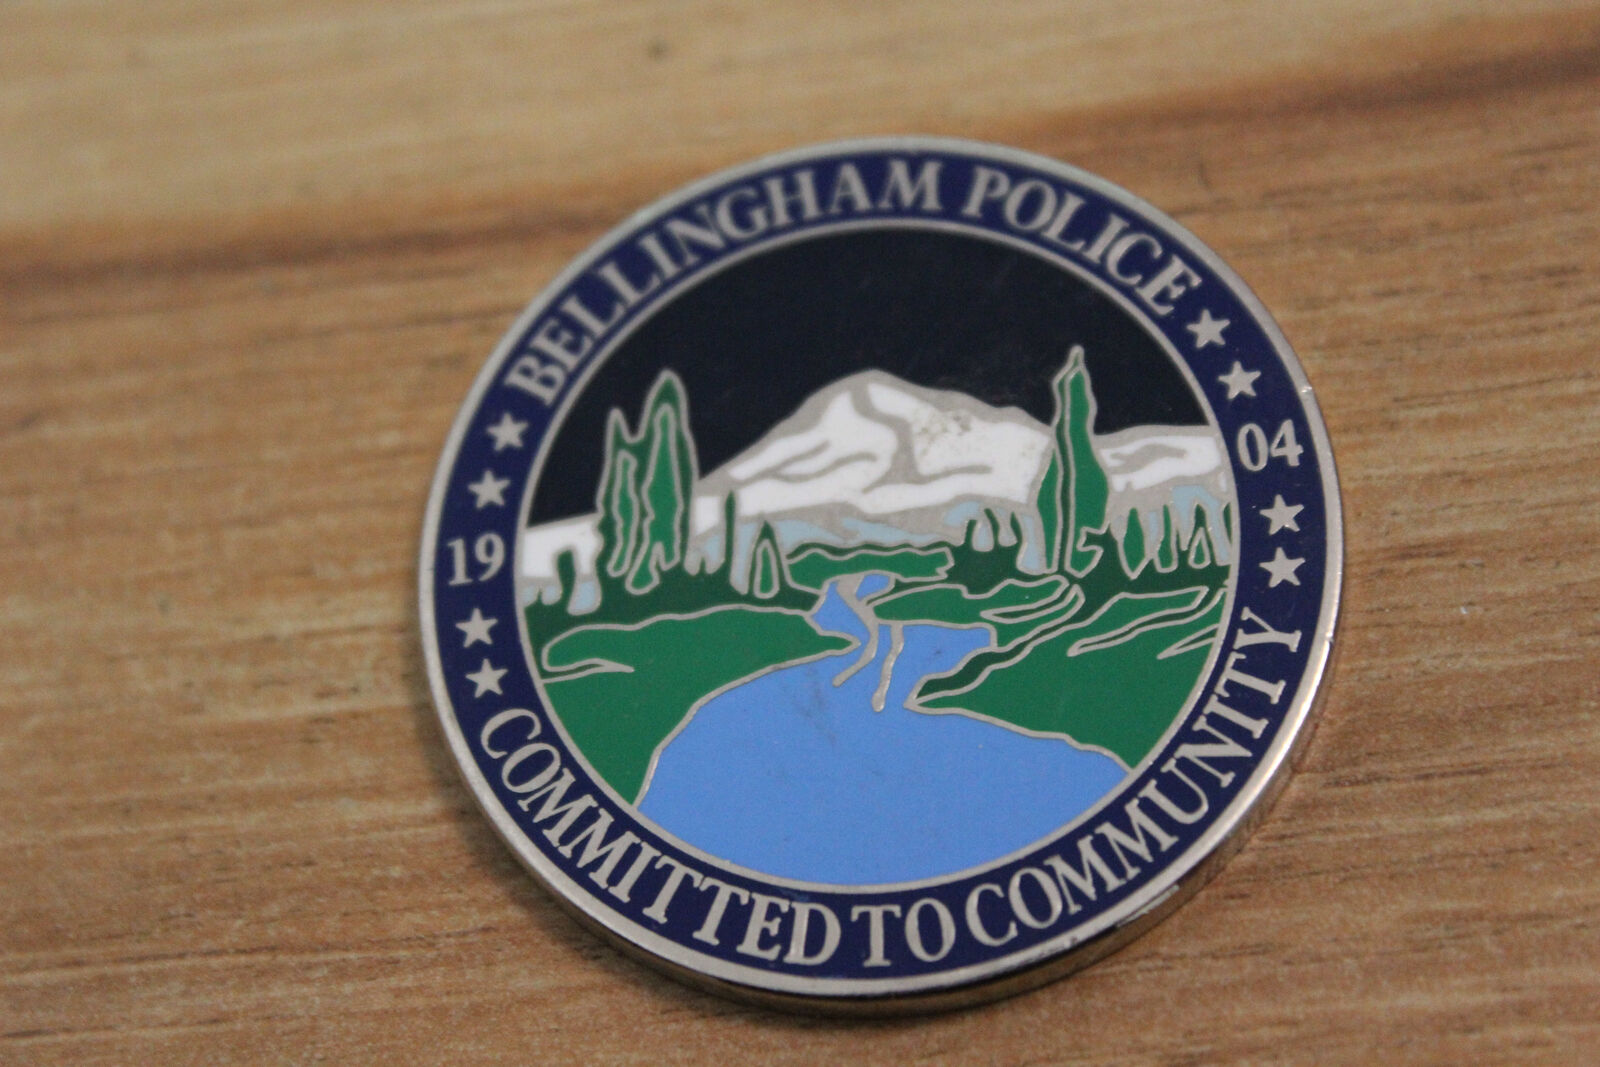 Bellingham Police Committed To Community Challenge Coin